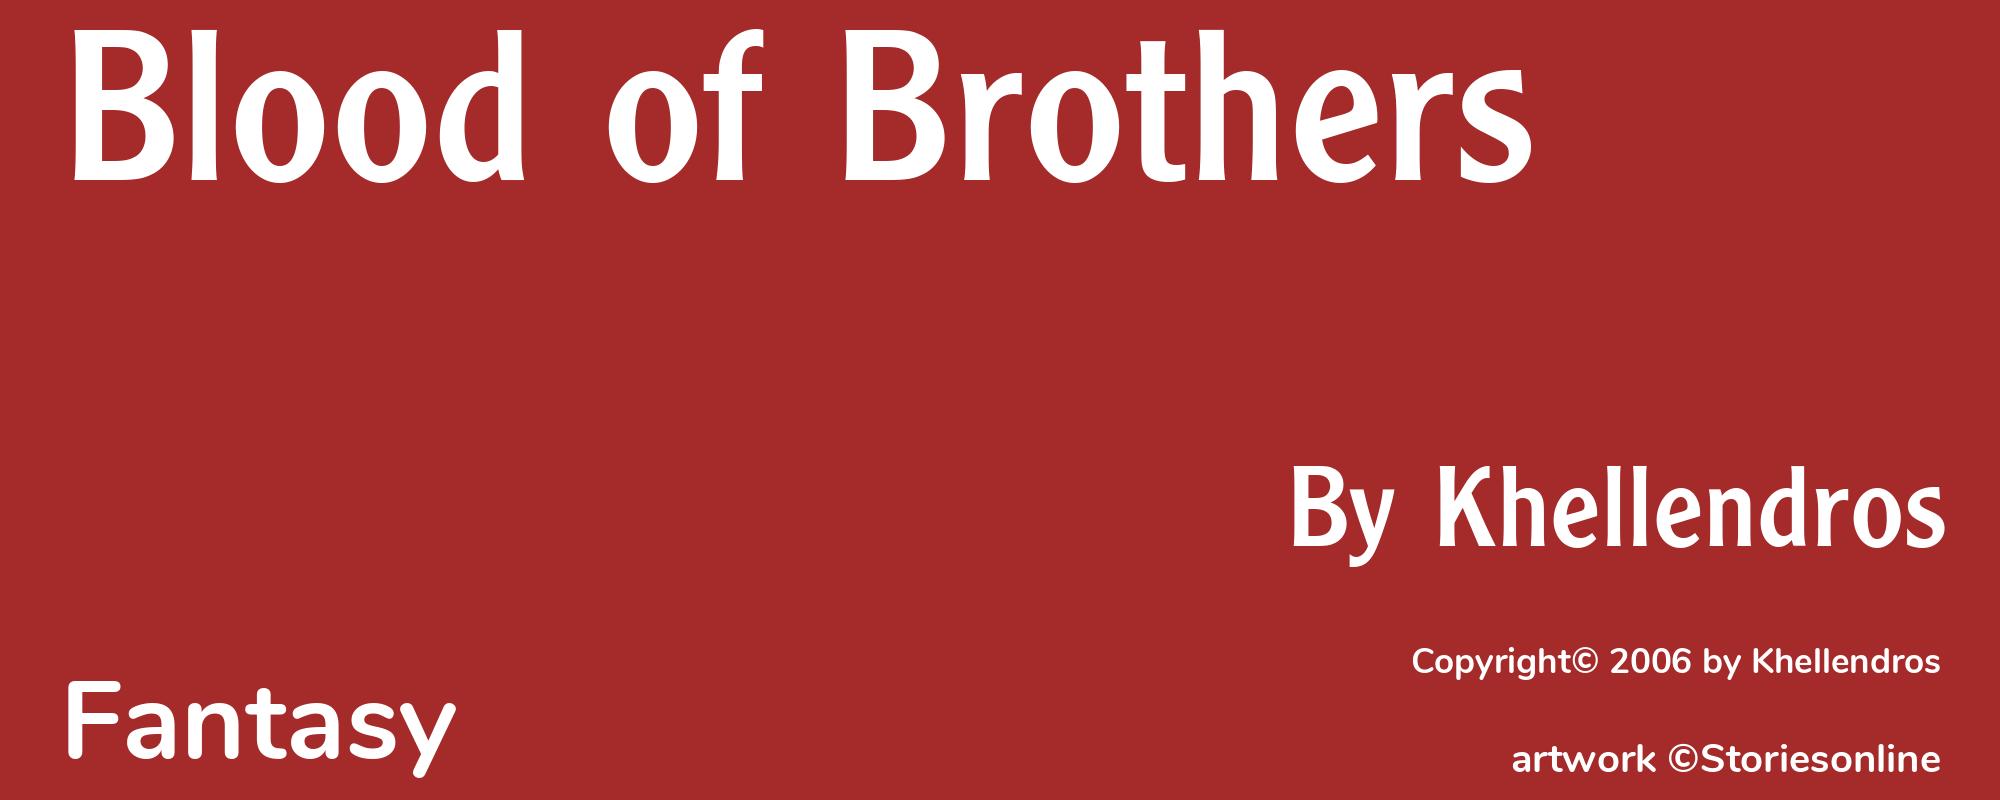 Blood of Brothers - Cover